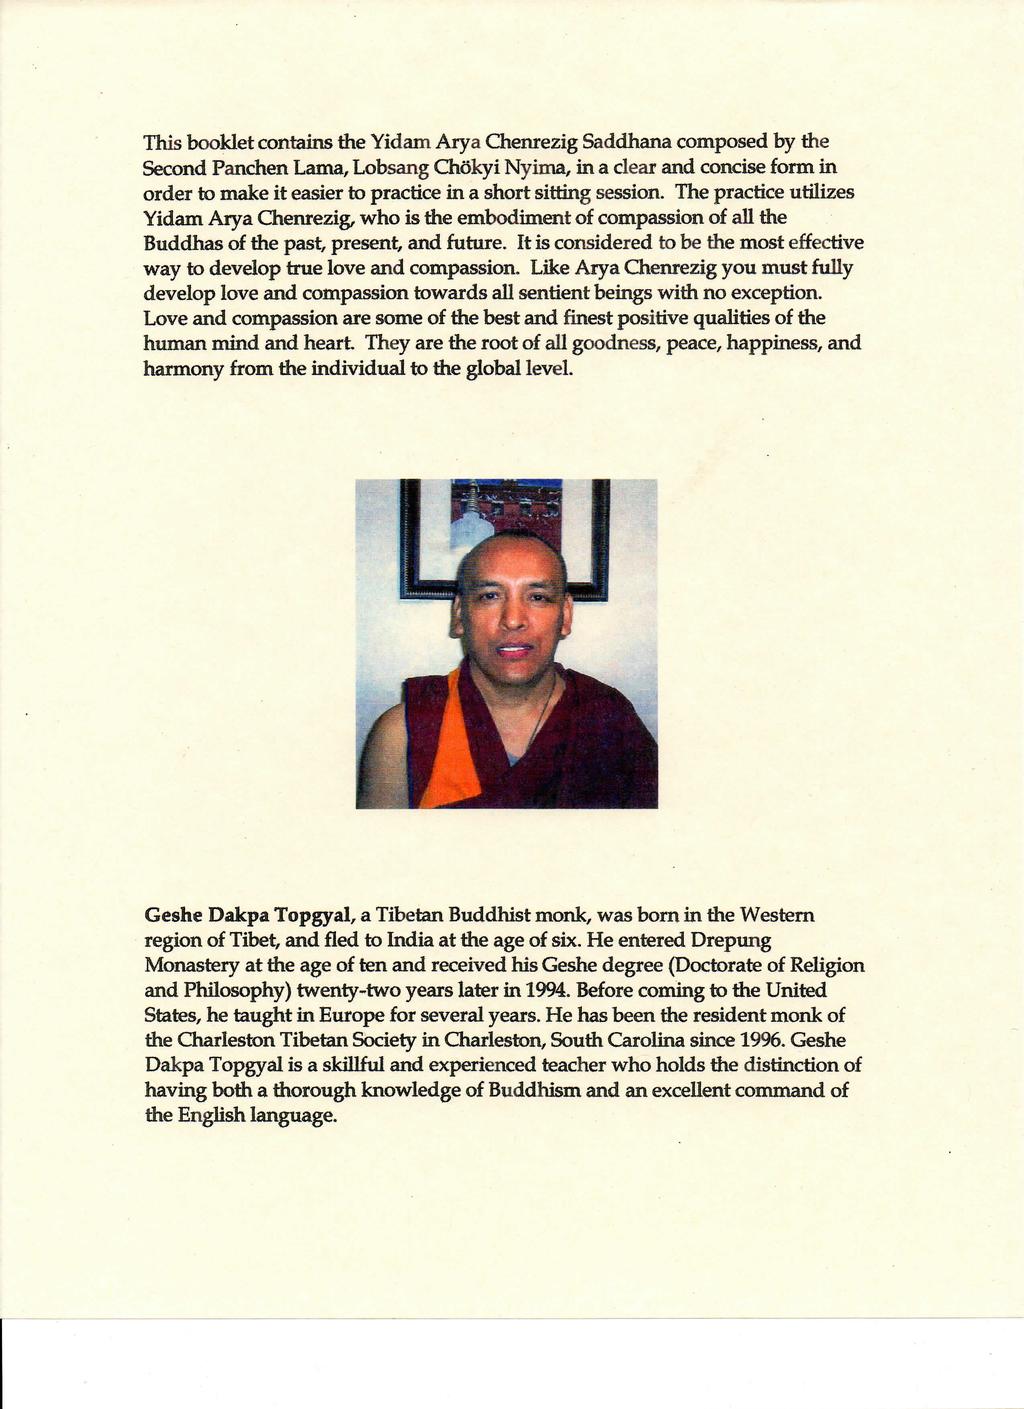 This booklet contains the Yidam Arya Chenrezig Saddhana composed by the Second Panchen Lama, Lobsang Chokyi Nyima, in a clear and concise form in order to make it easier to practice in a short